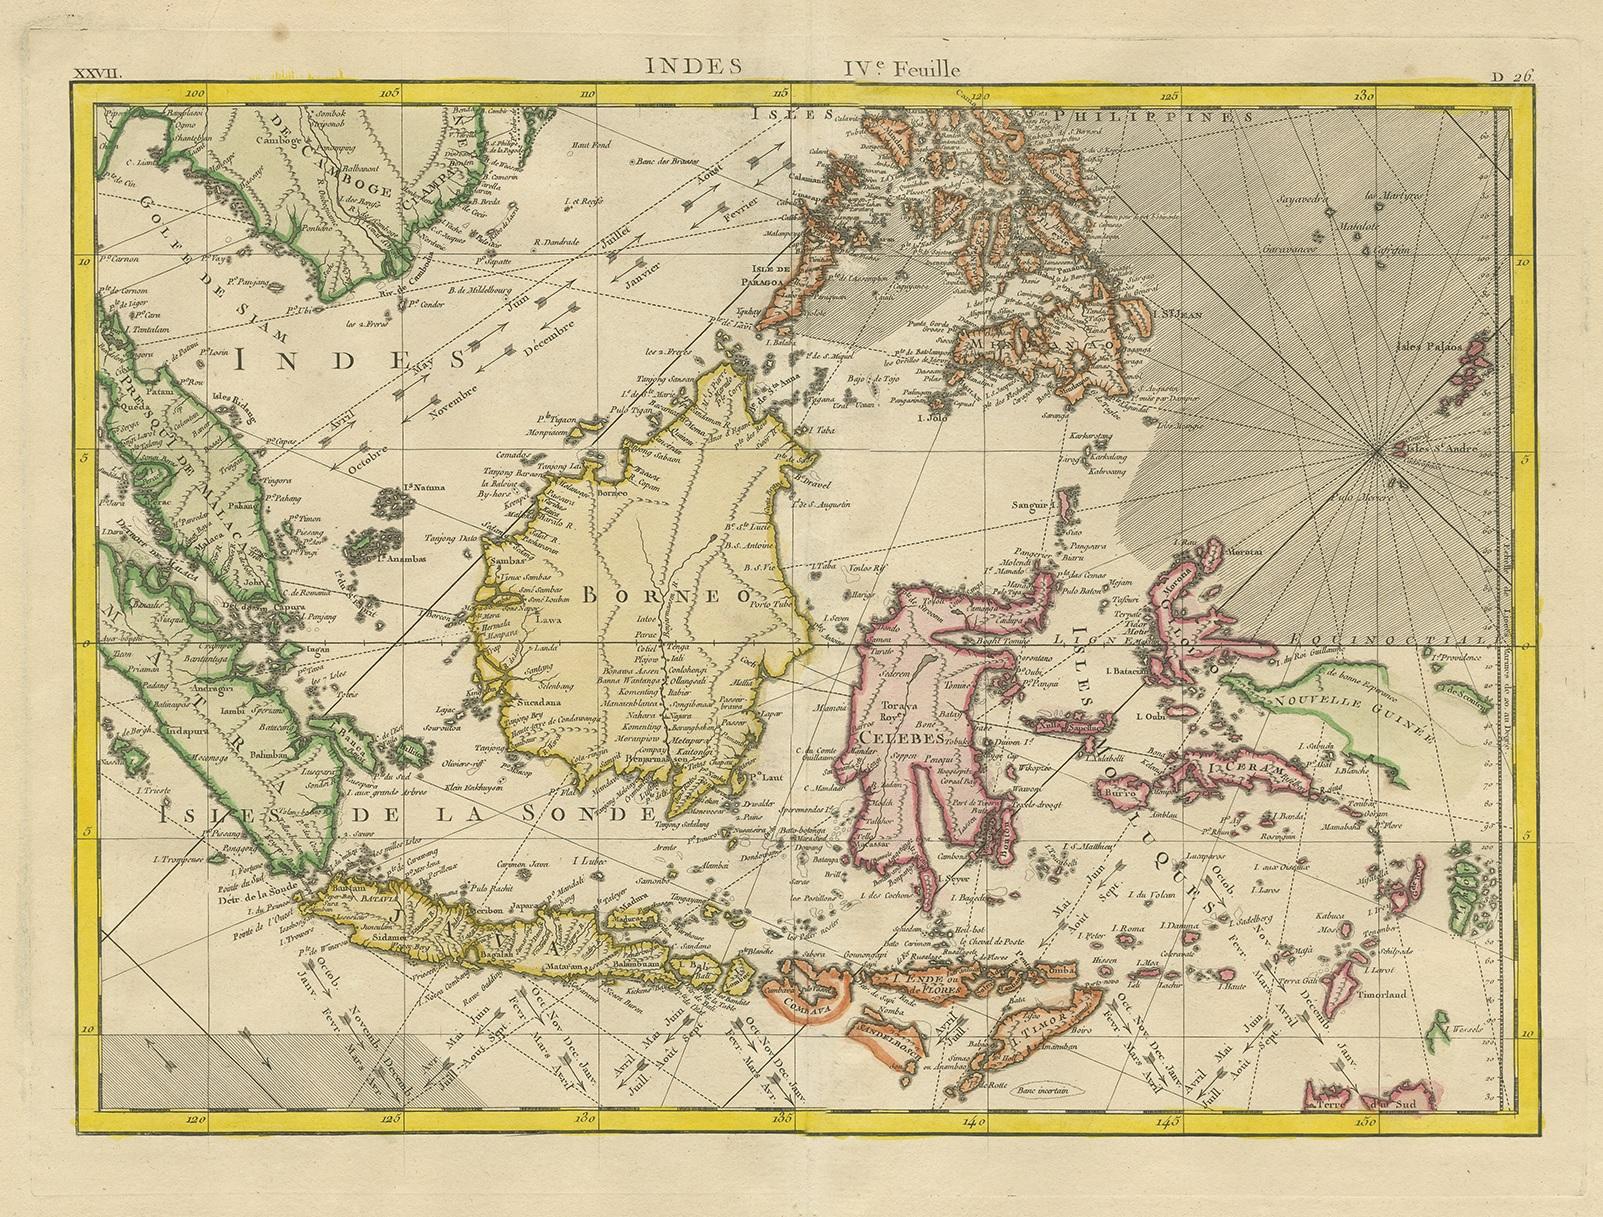 Antique map titled 'Indes IVe Feuille'. Very decorative original antique map of the East Indies. Covbers from the Gulf of Siam (Gulf of Thailand) and Malacca (Malaysia) eastward to include parts of Sumatra, Java, Borneo, Celebes, parts of Cambodia,